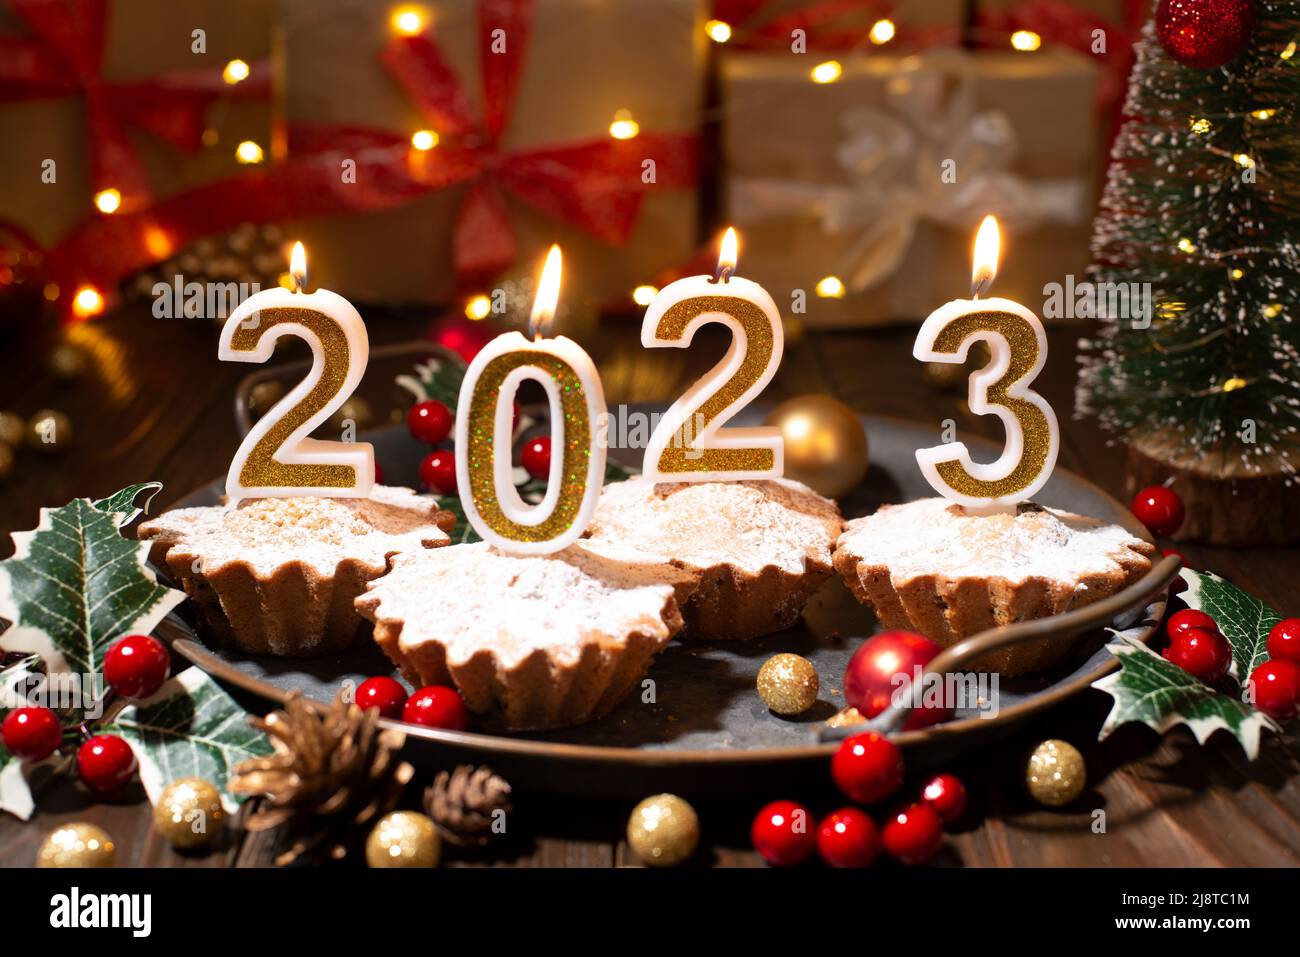 Food tray with cupcakes new year candles and christmas decorations Stock Photo